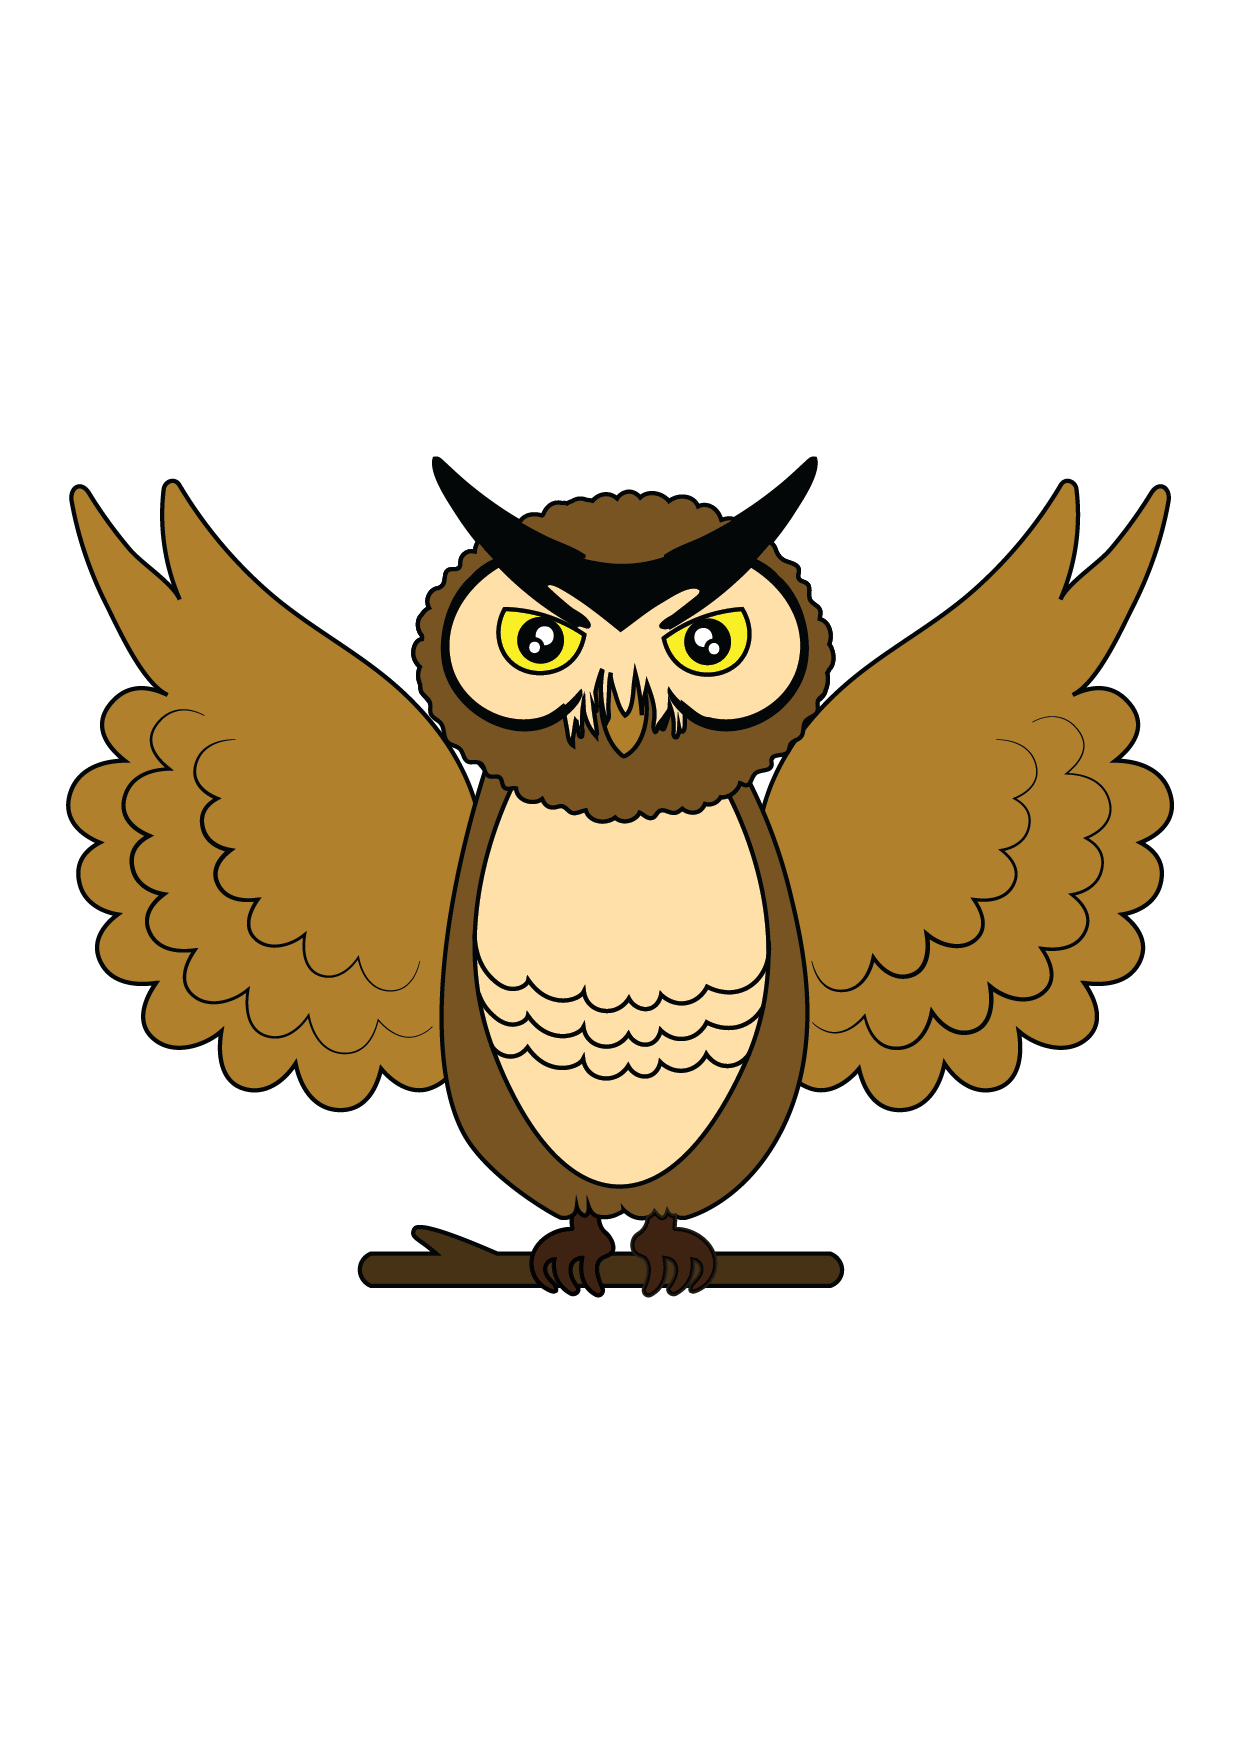 How to Draw An Owl Step by Step Printable